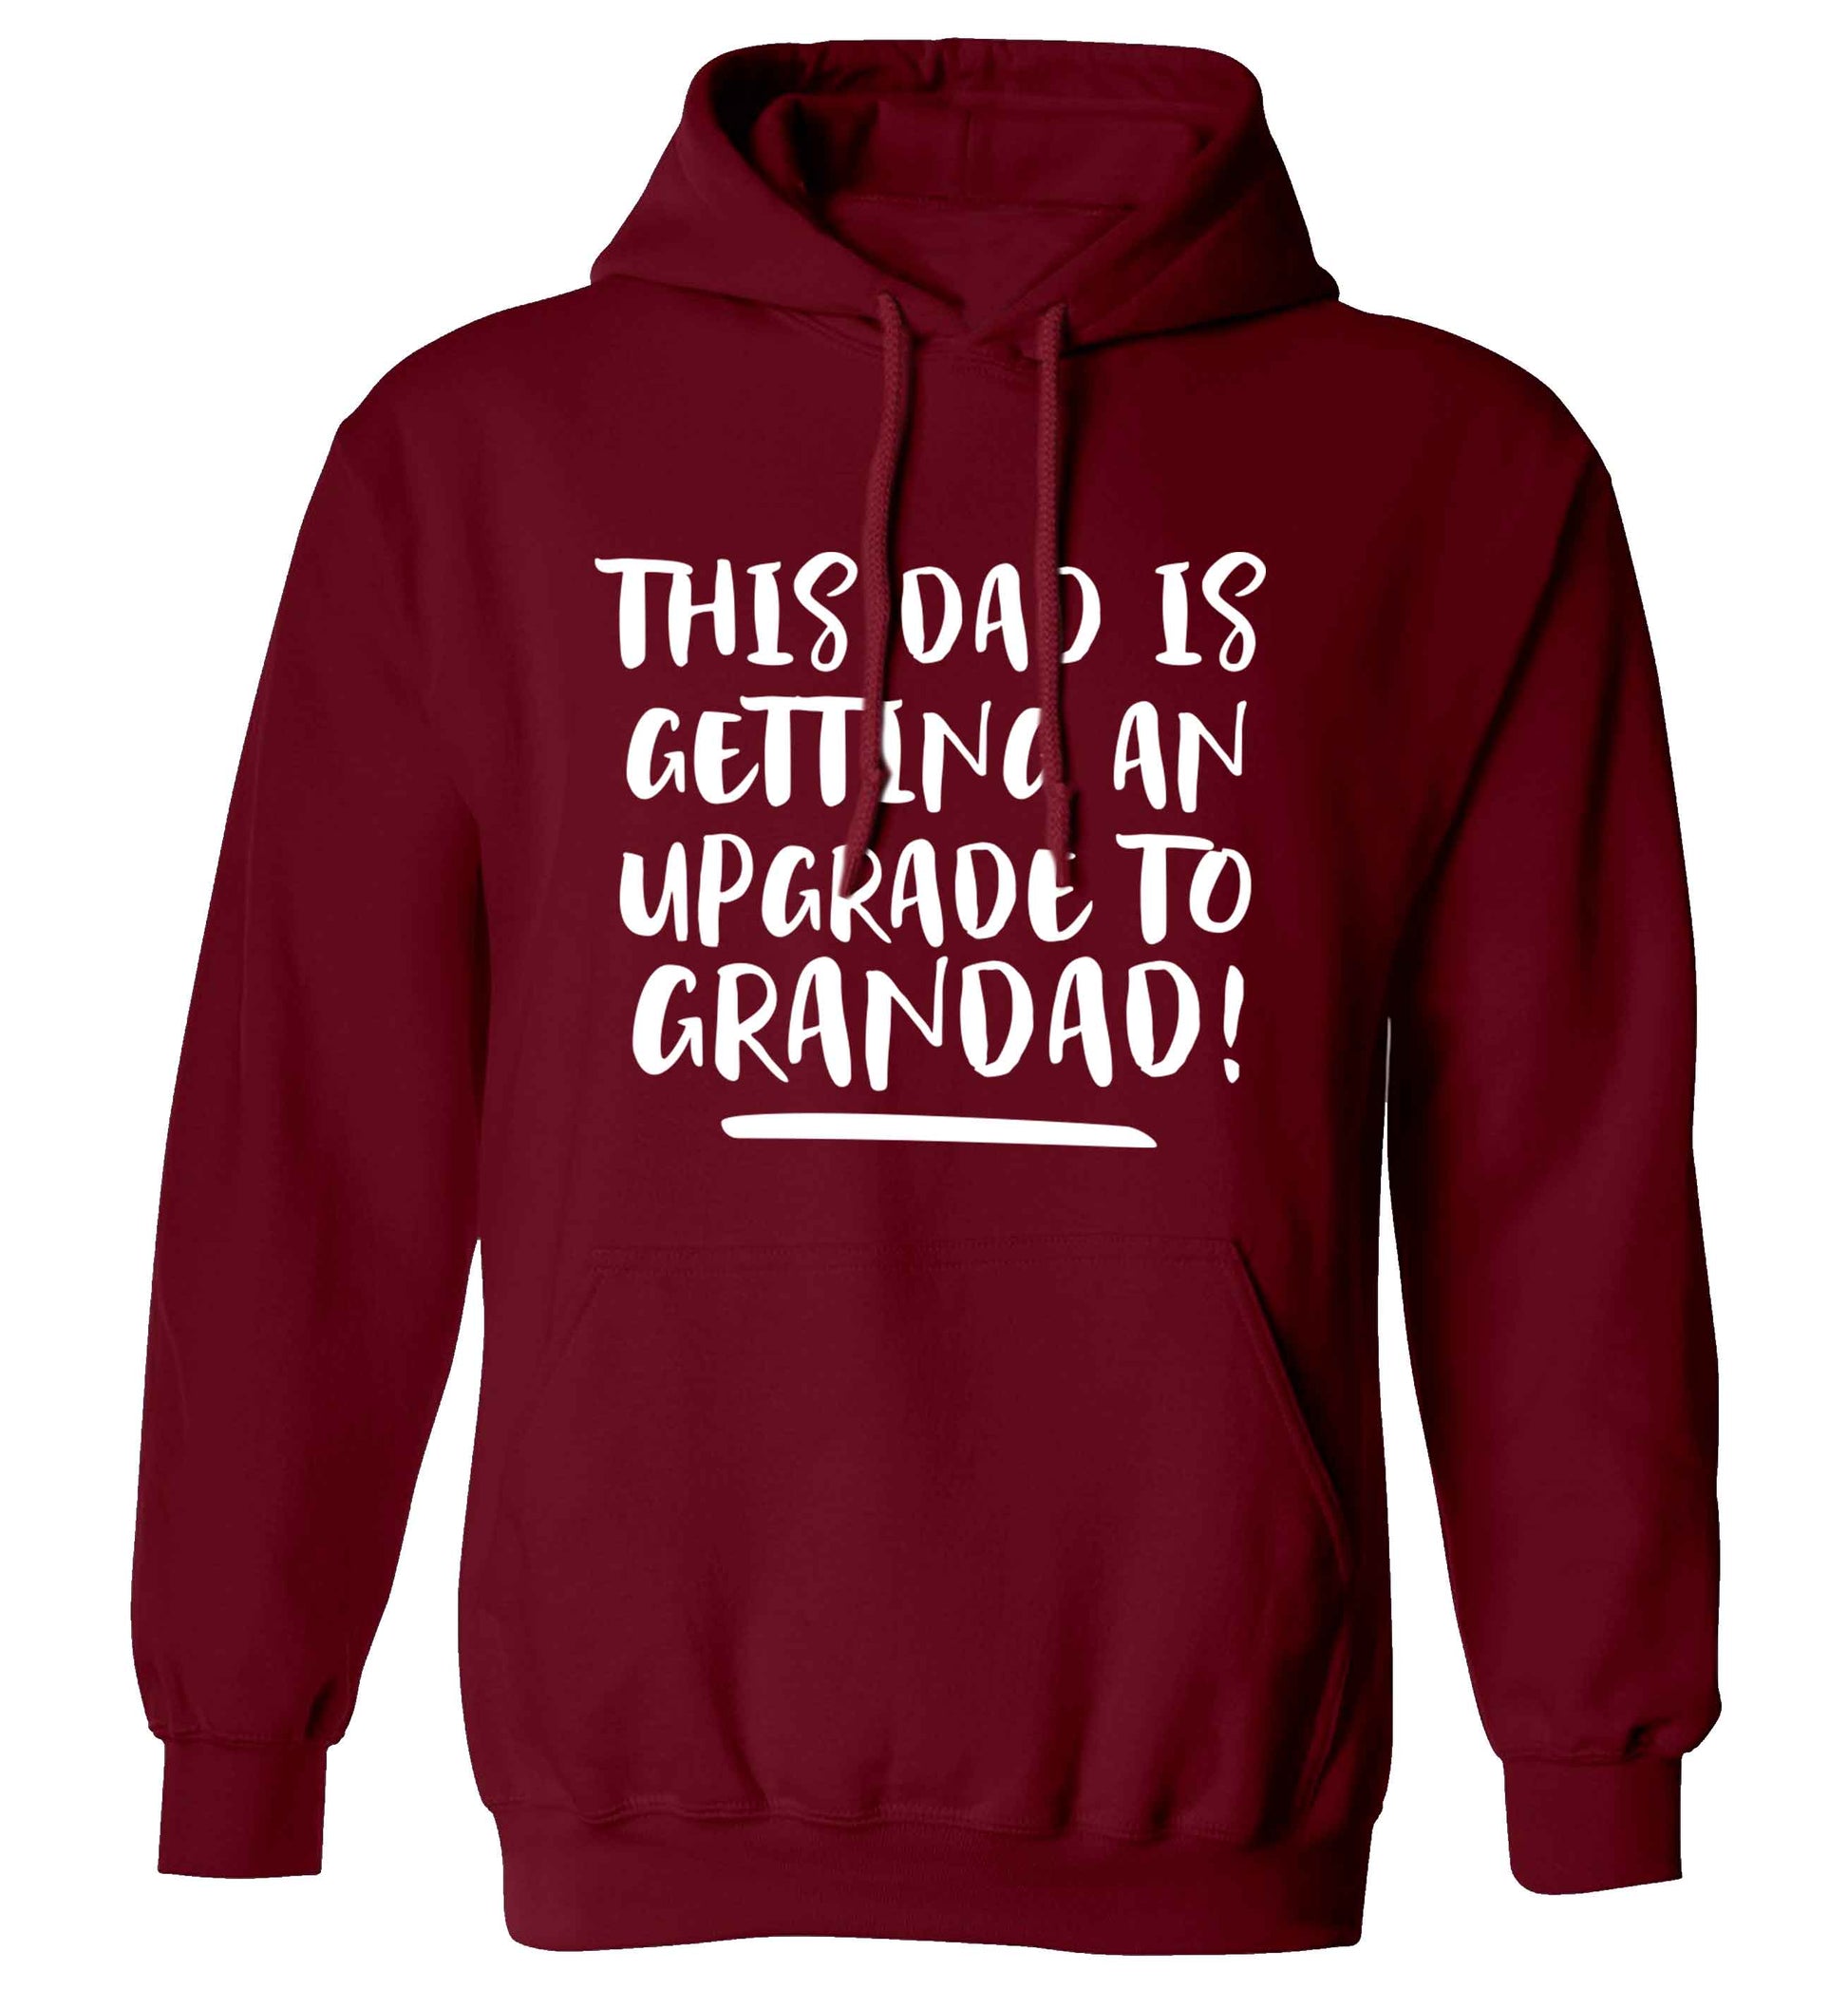 This dad is getting an upgrade to grandad! adults unisex maroon hoodie 2XL